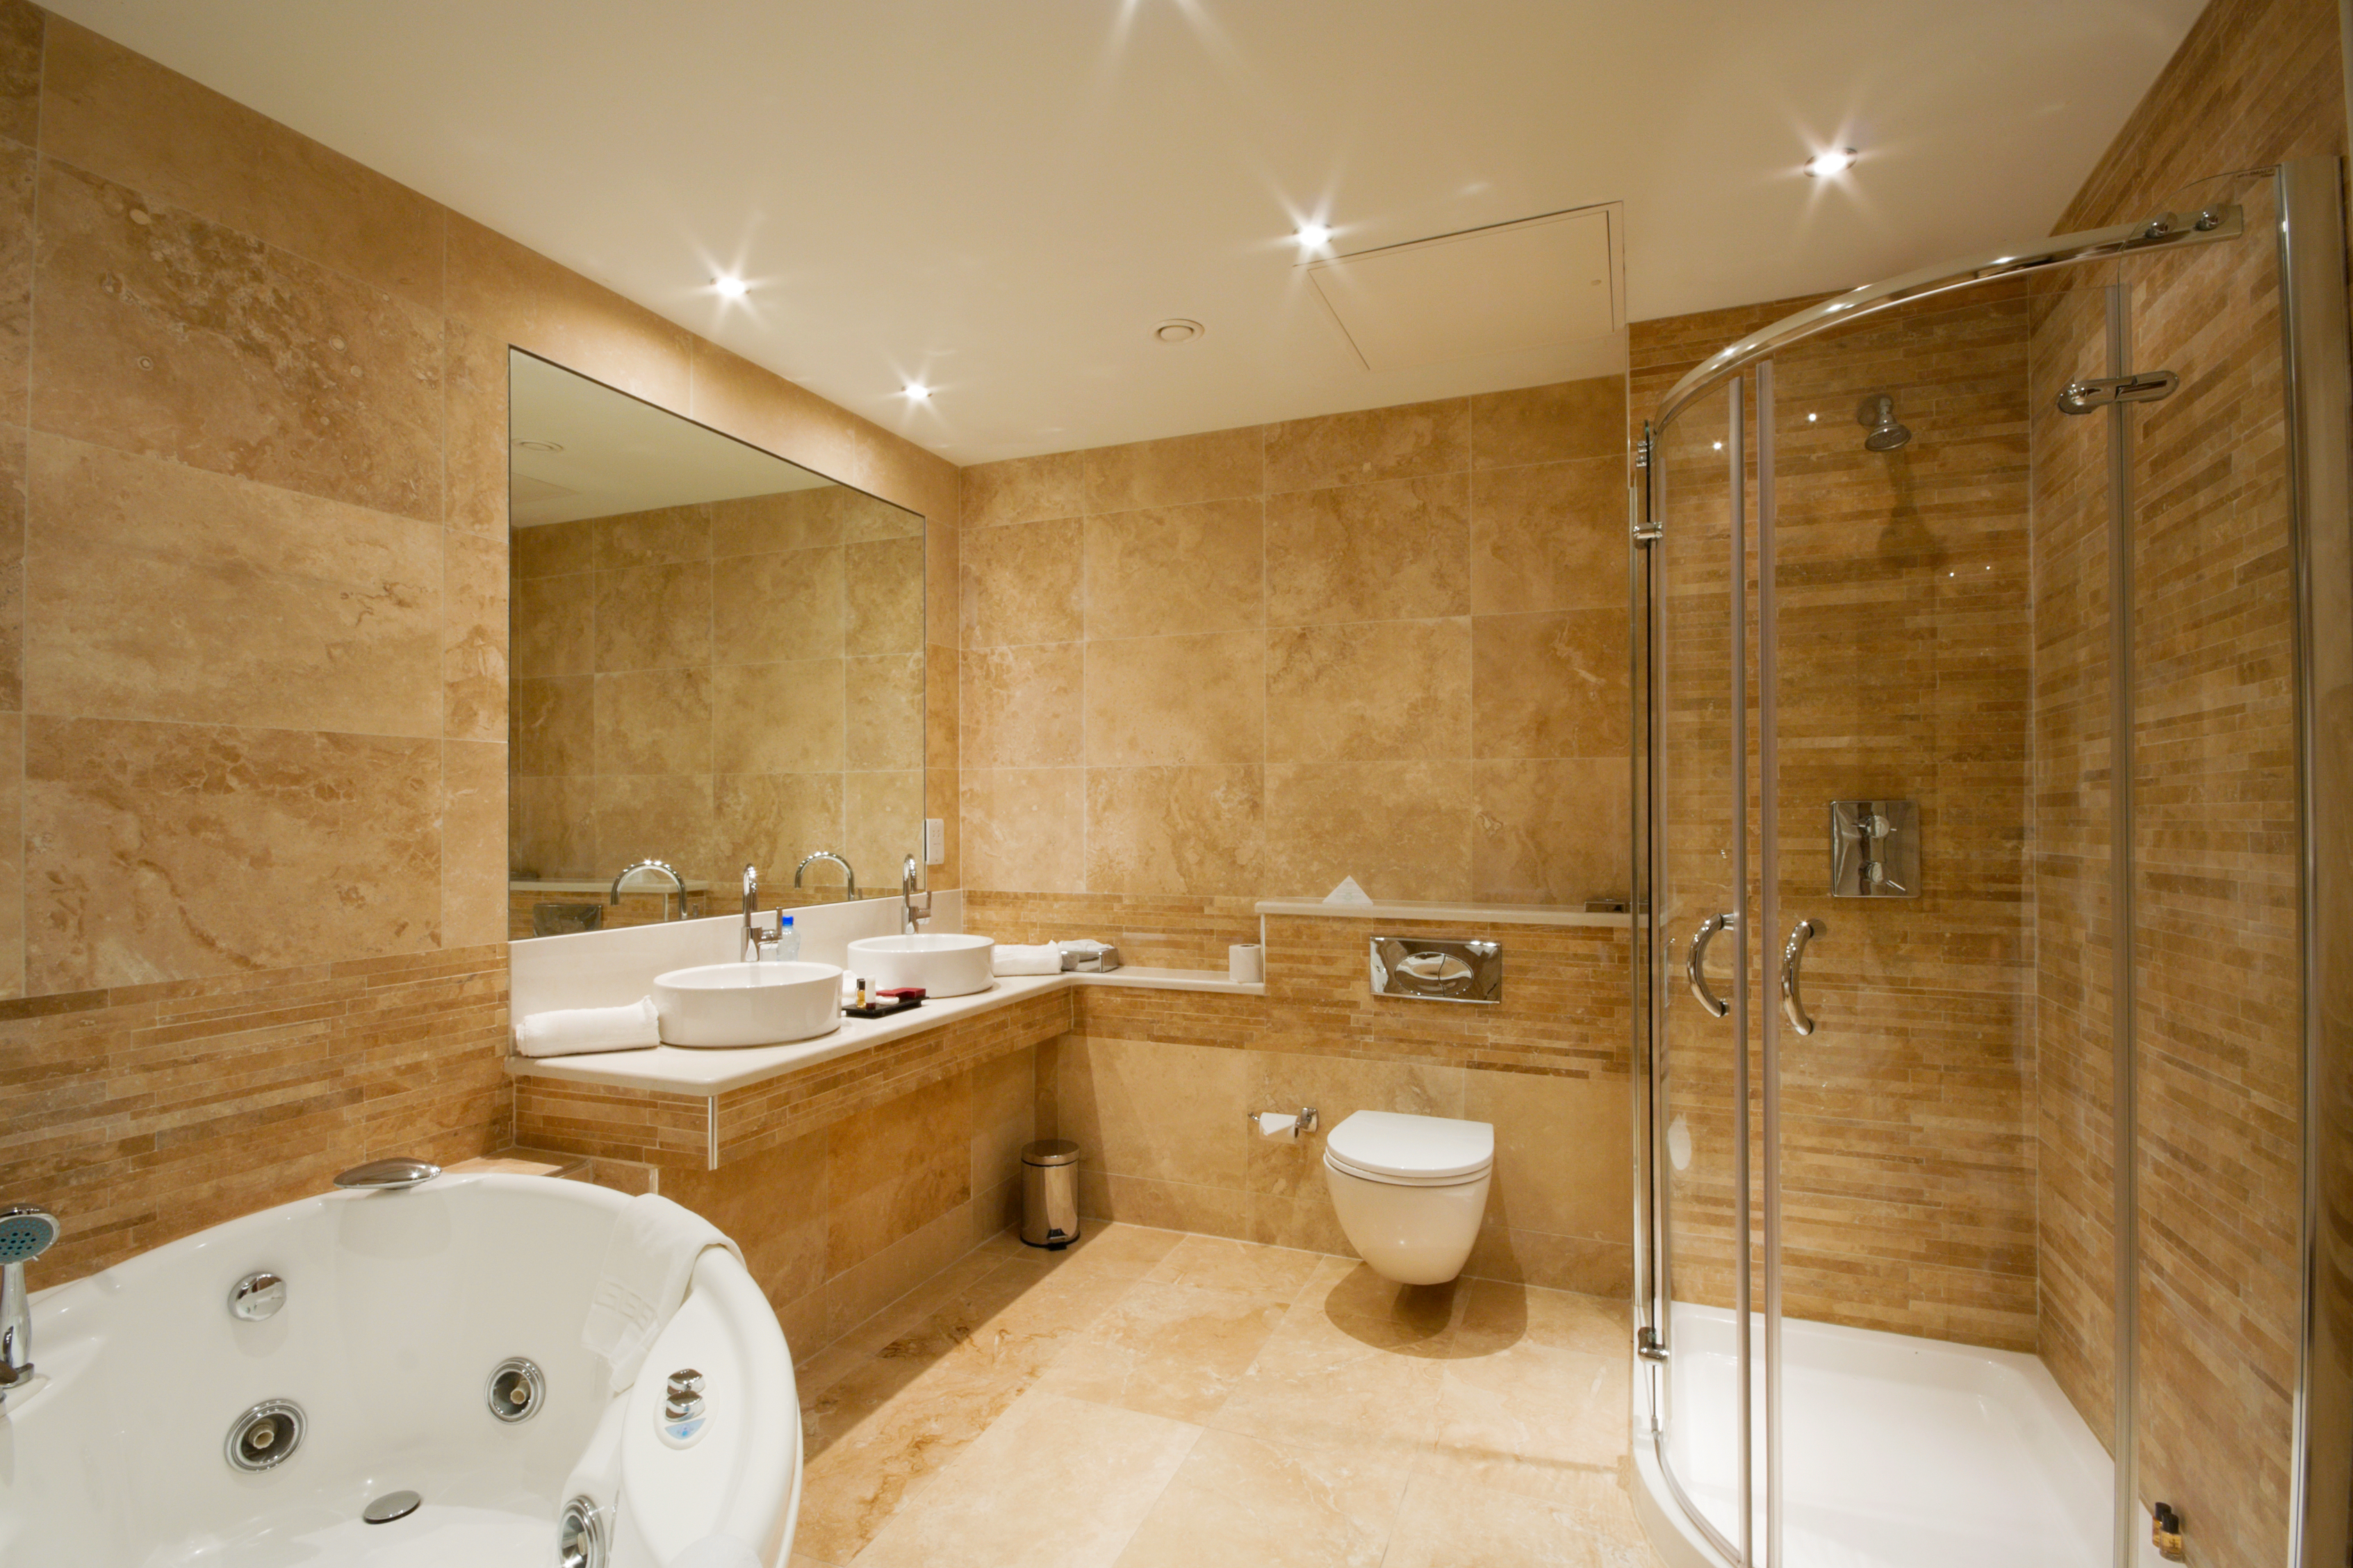 when to remodel your bathroom, signs to remodel your bathroom, remodeling your bathroom, how to remodel your bathroom